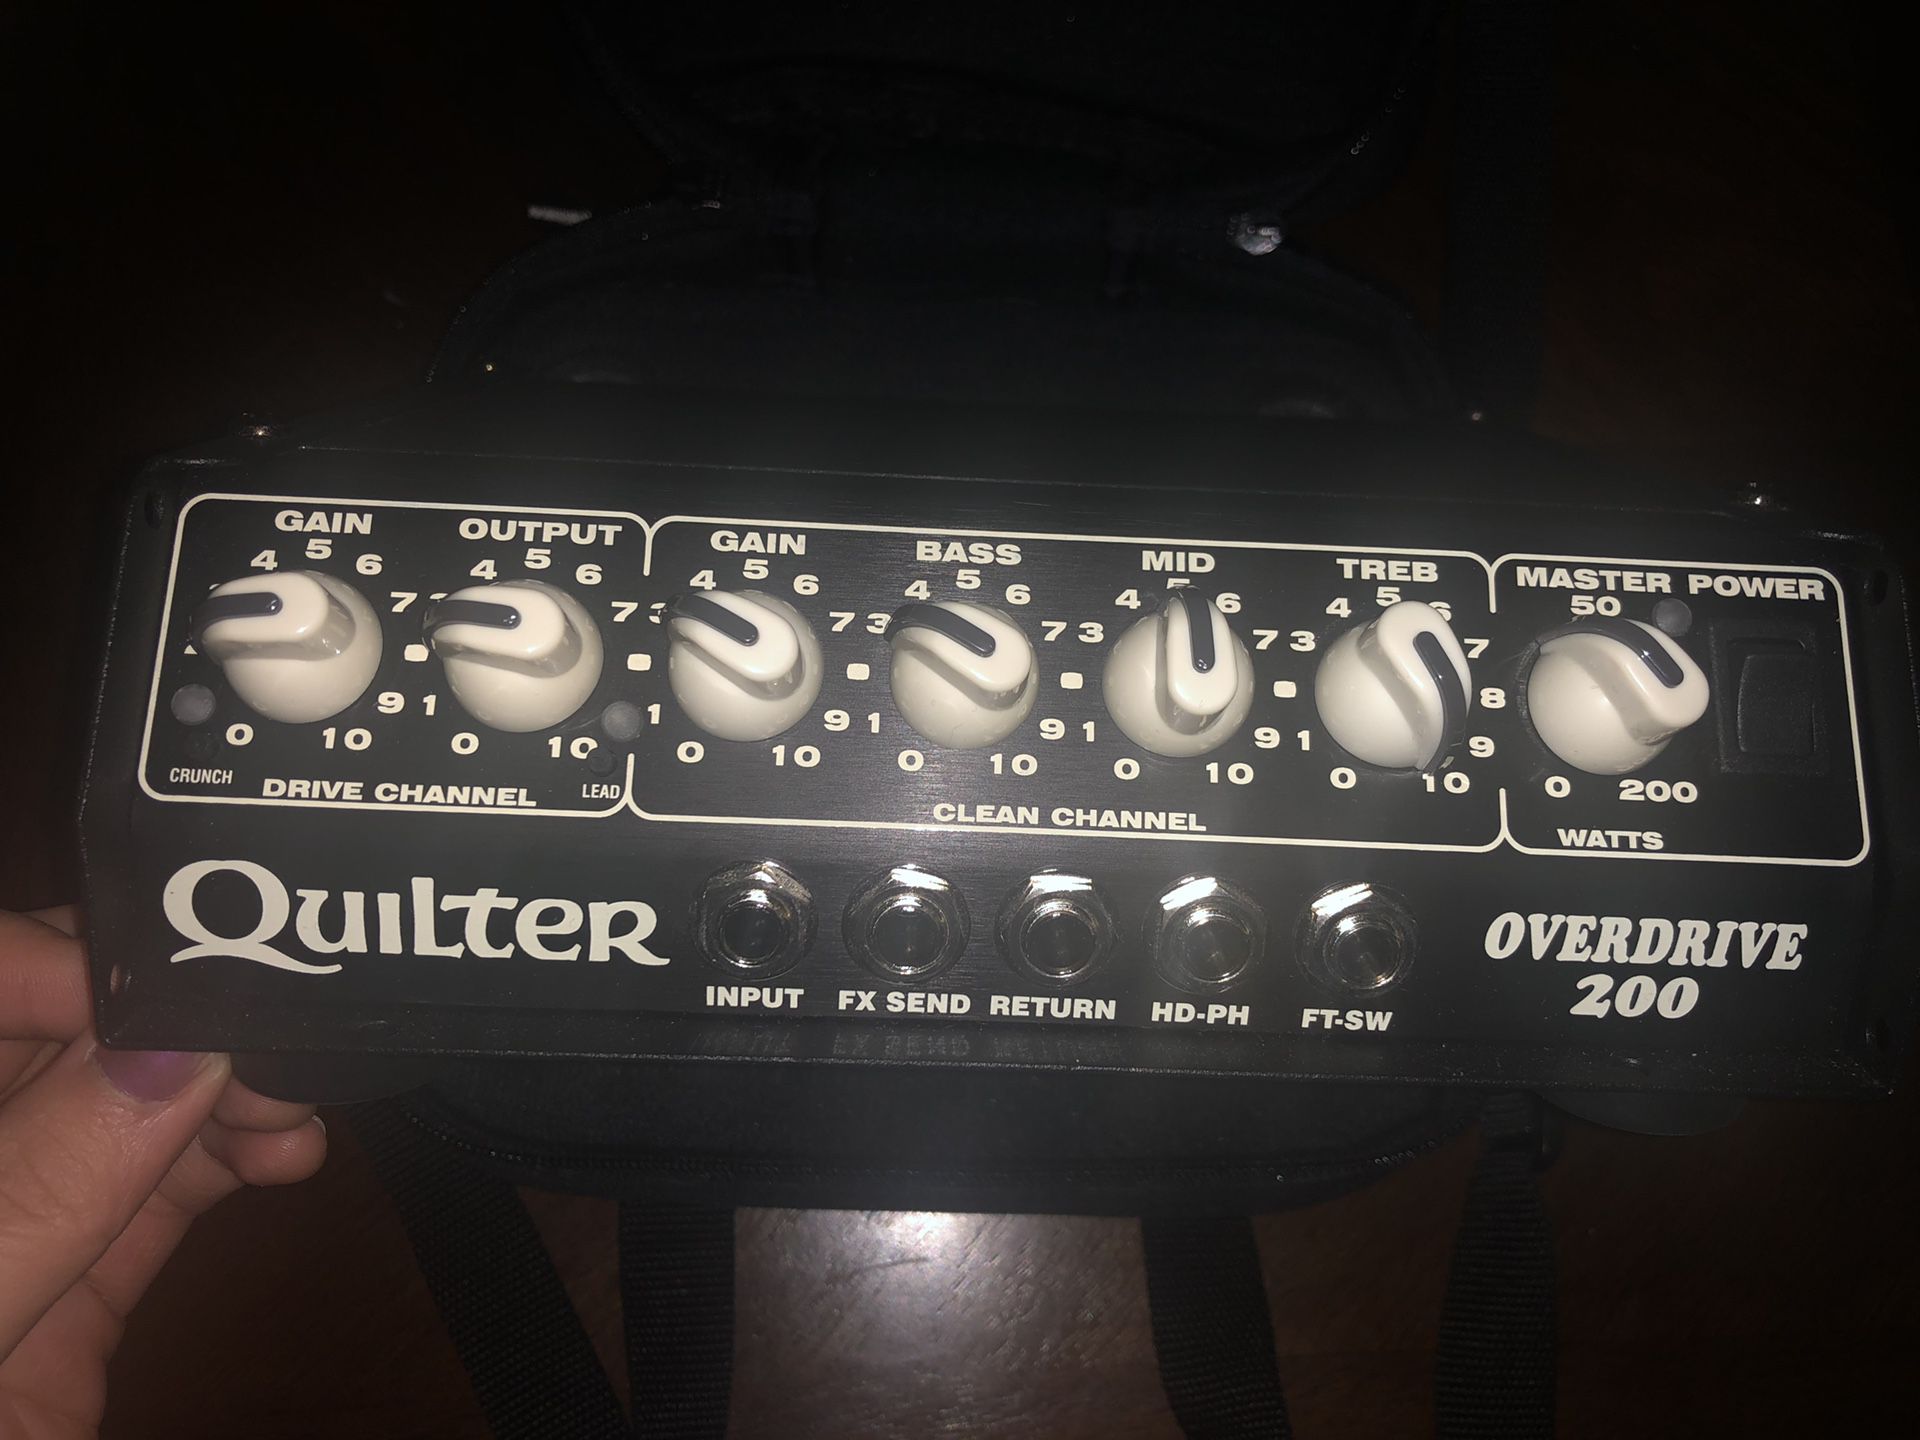 Quilter Overdrive 200 guitar amp head